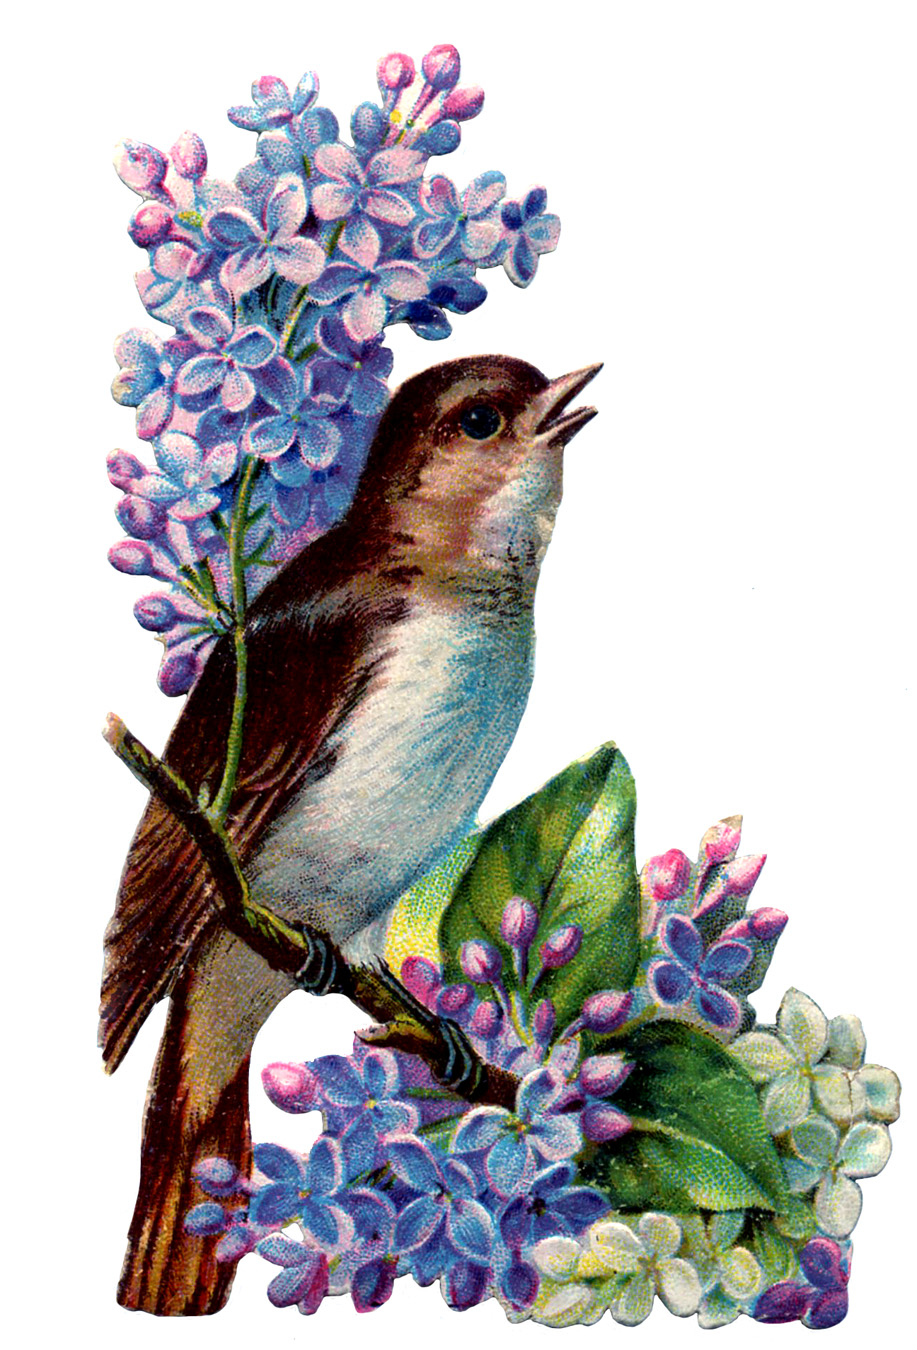 Vintage Image   Bird With Lilacs   The Graphics Fairy